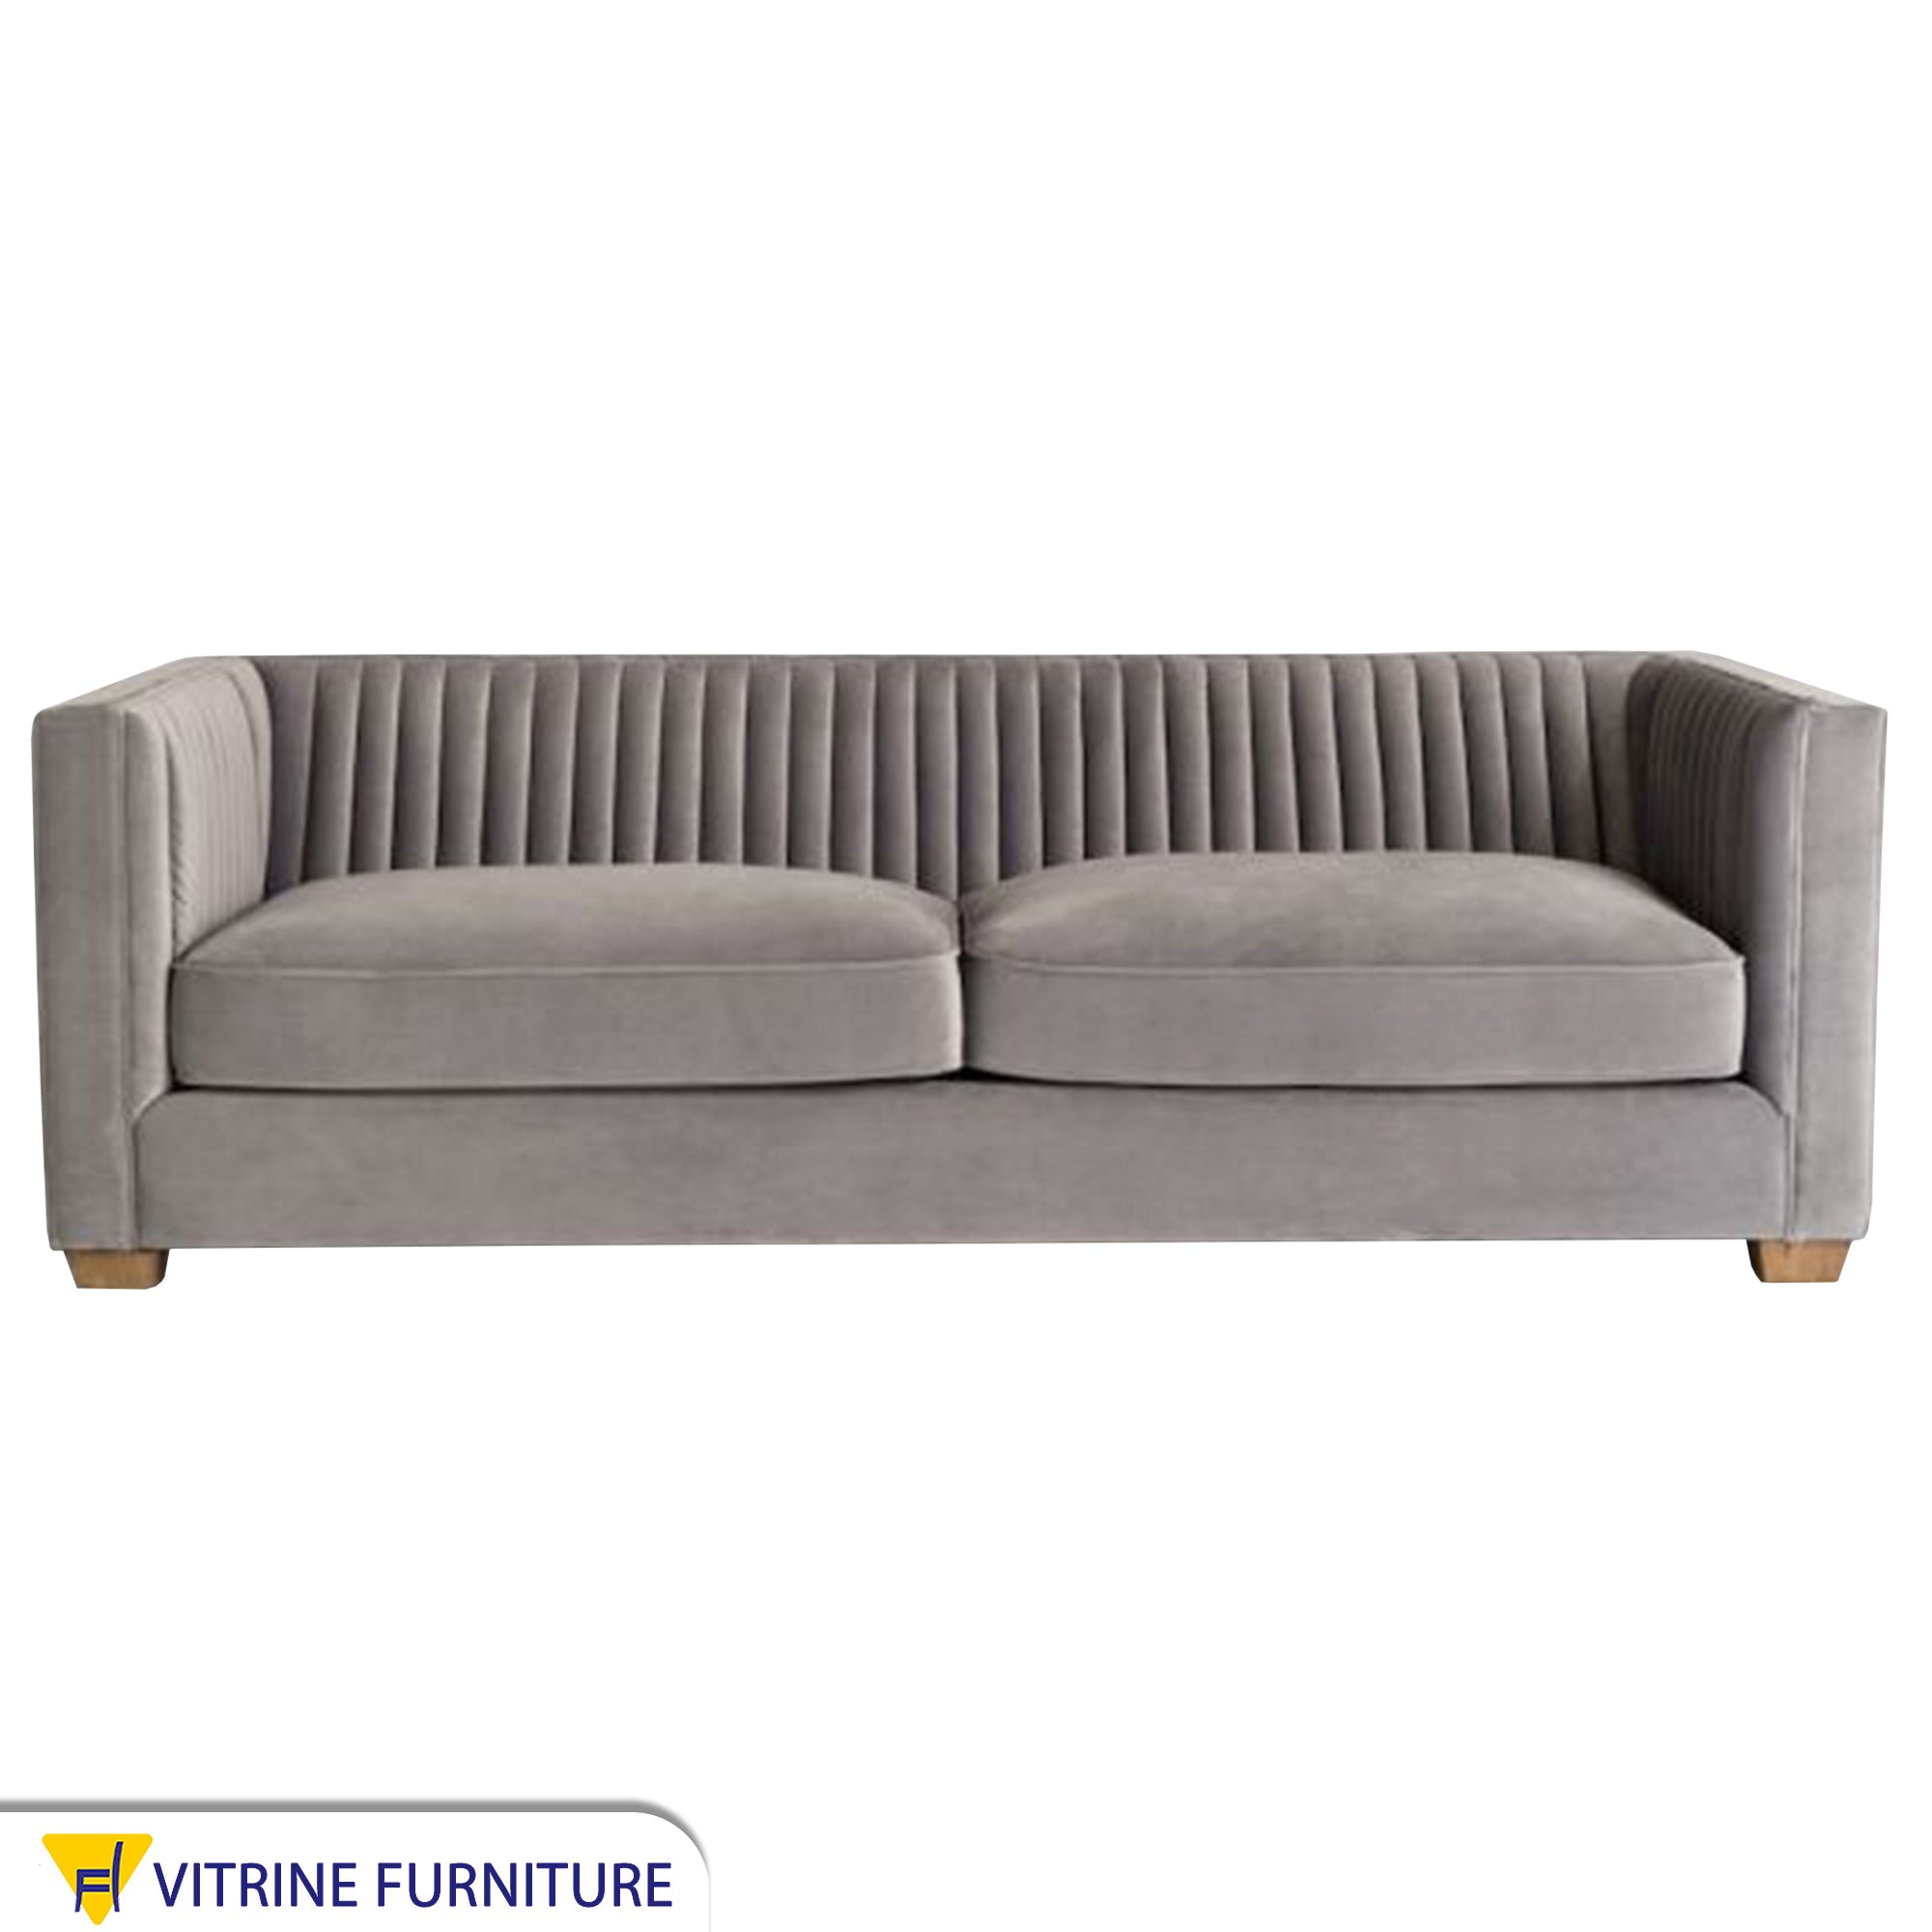 Cascading fabric pleated sofa with backrest